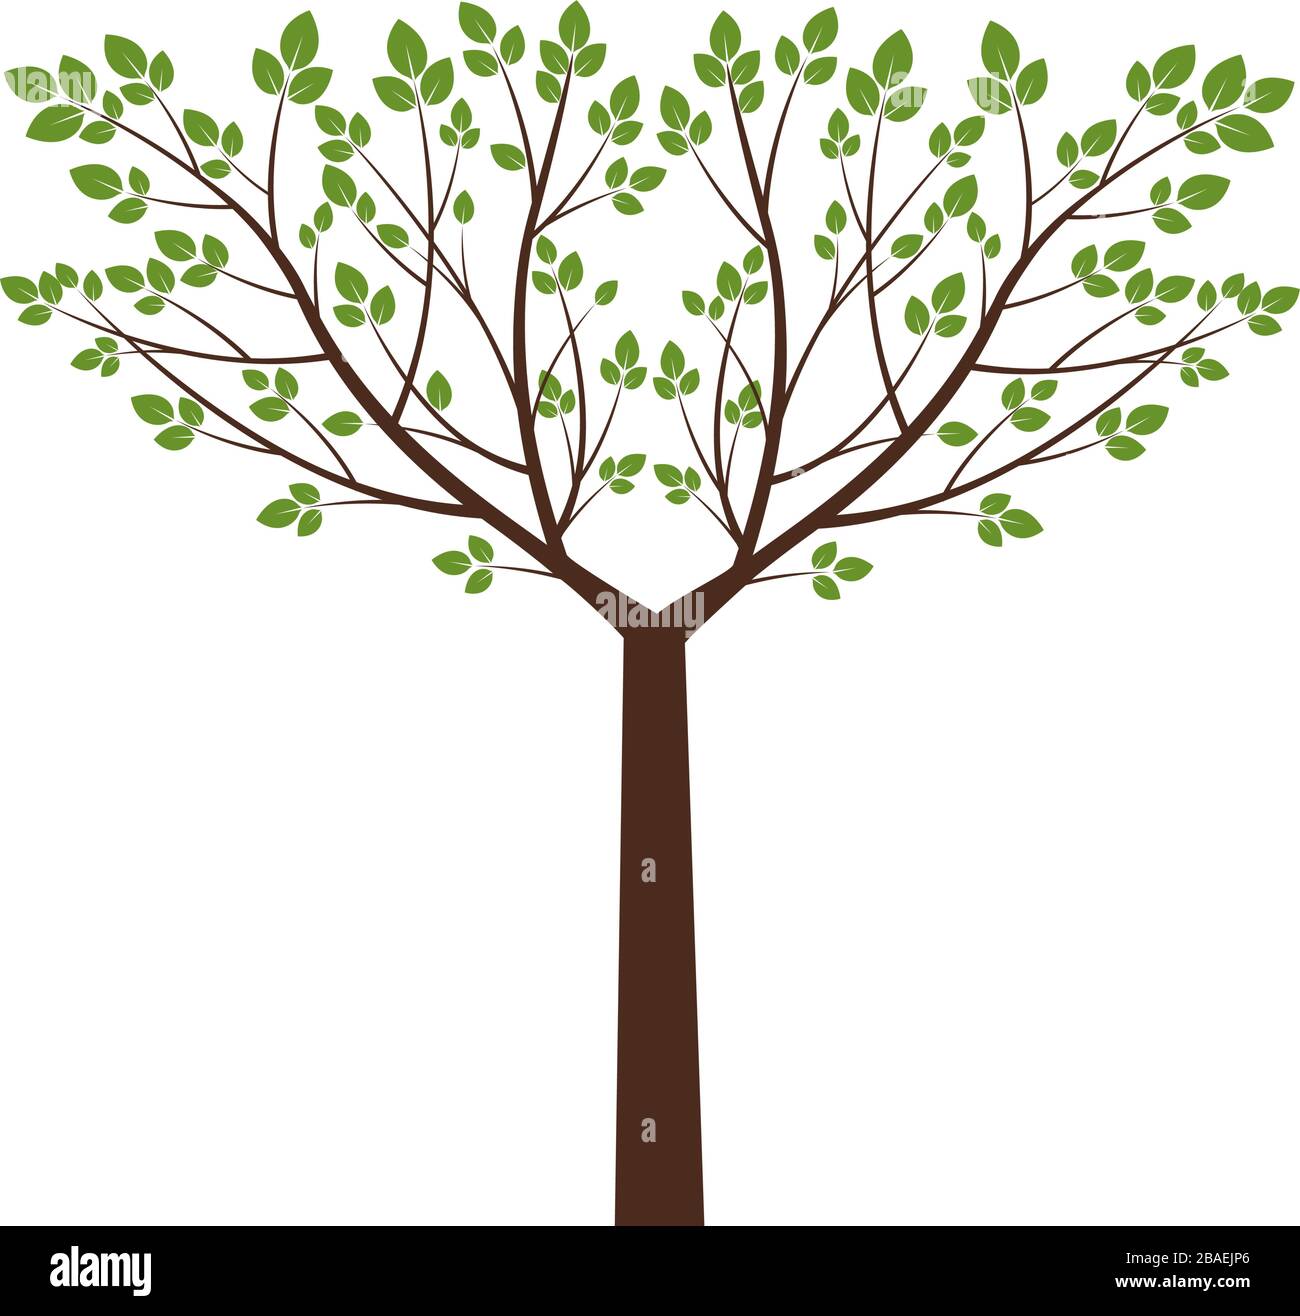 Green Tree and Leaves. Vector Illustration. Stock Vector